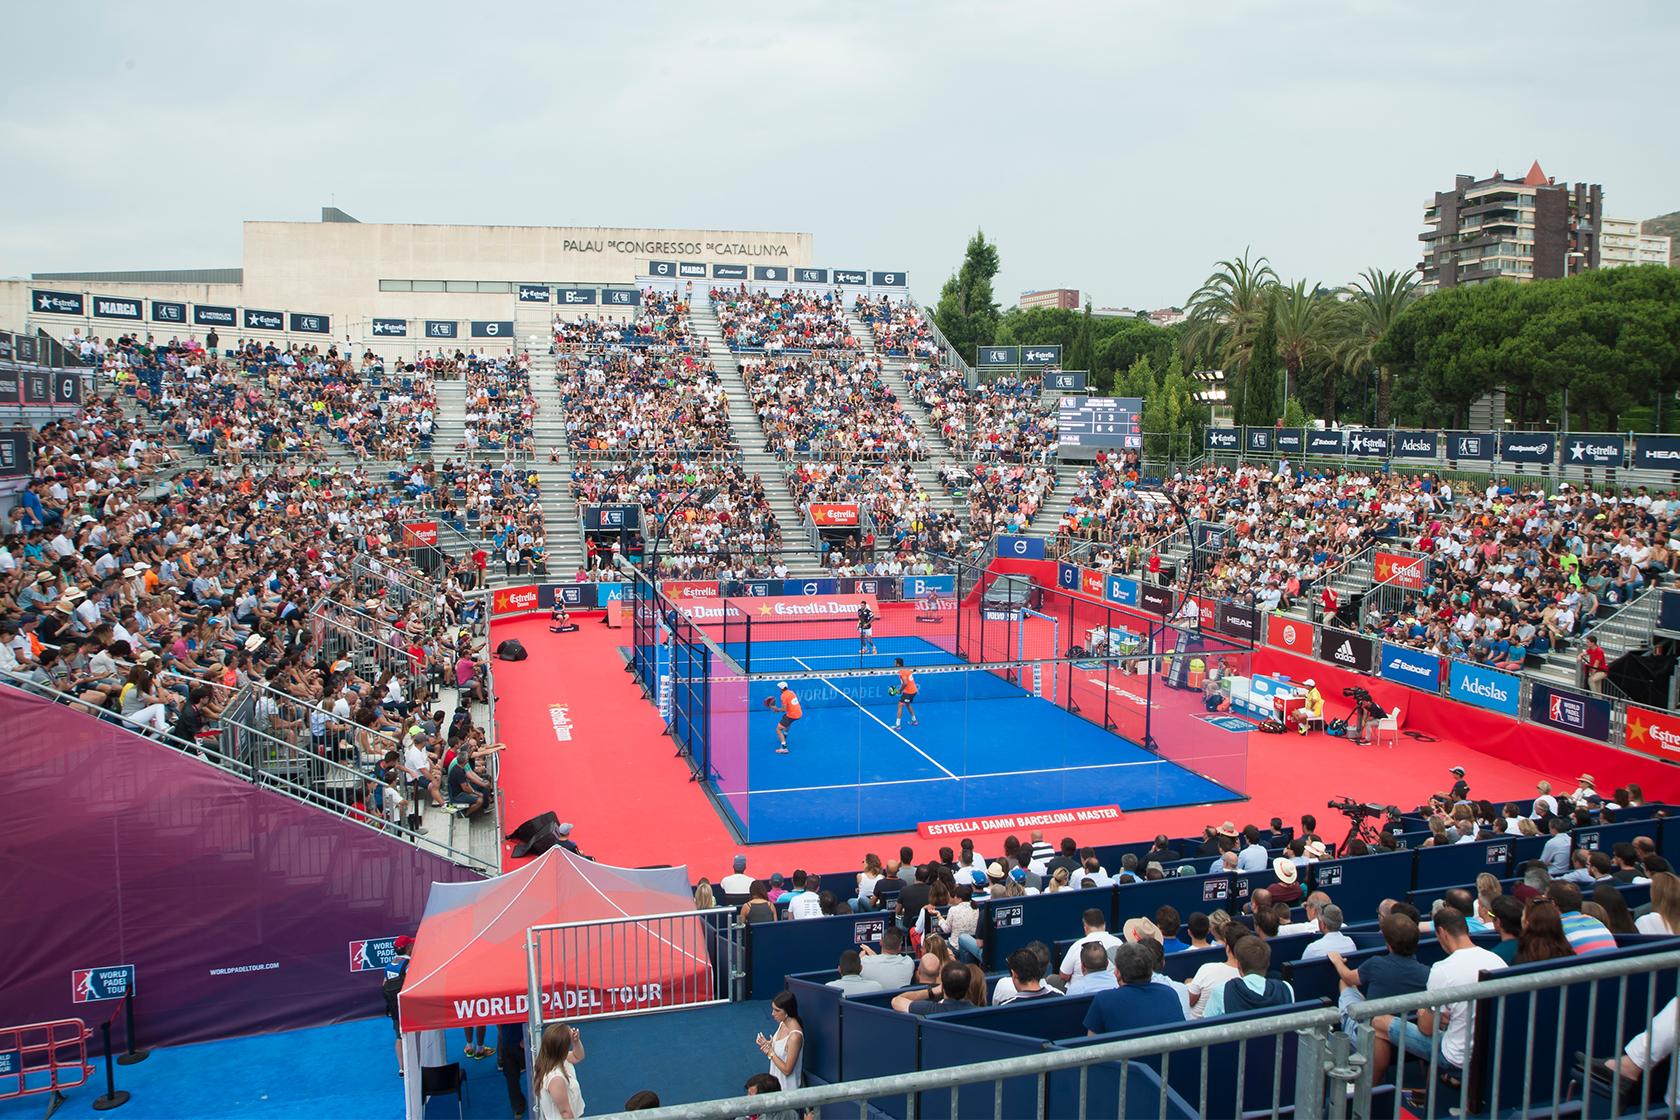 what is world padel tour